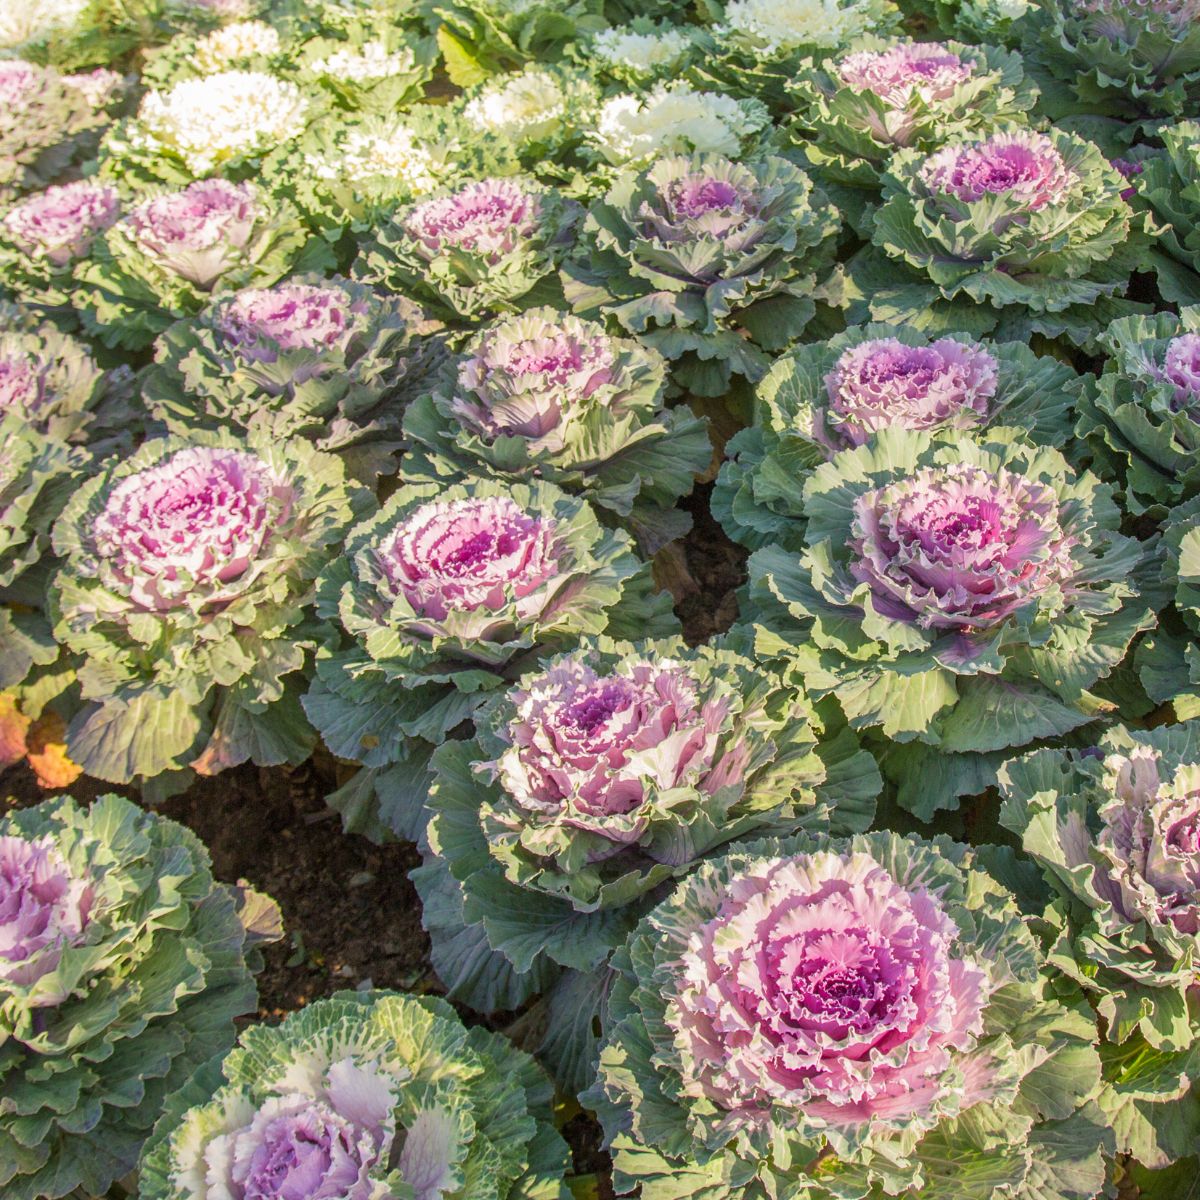 How to Grow Ornamental Cabbage! Create A Stunning Fall Display